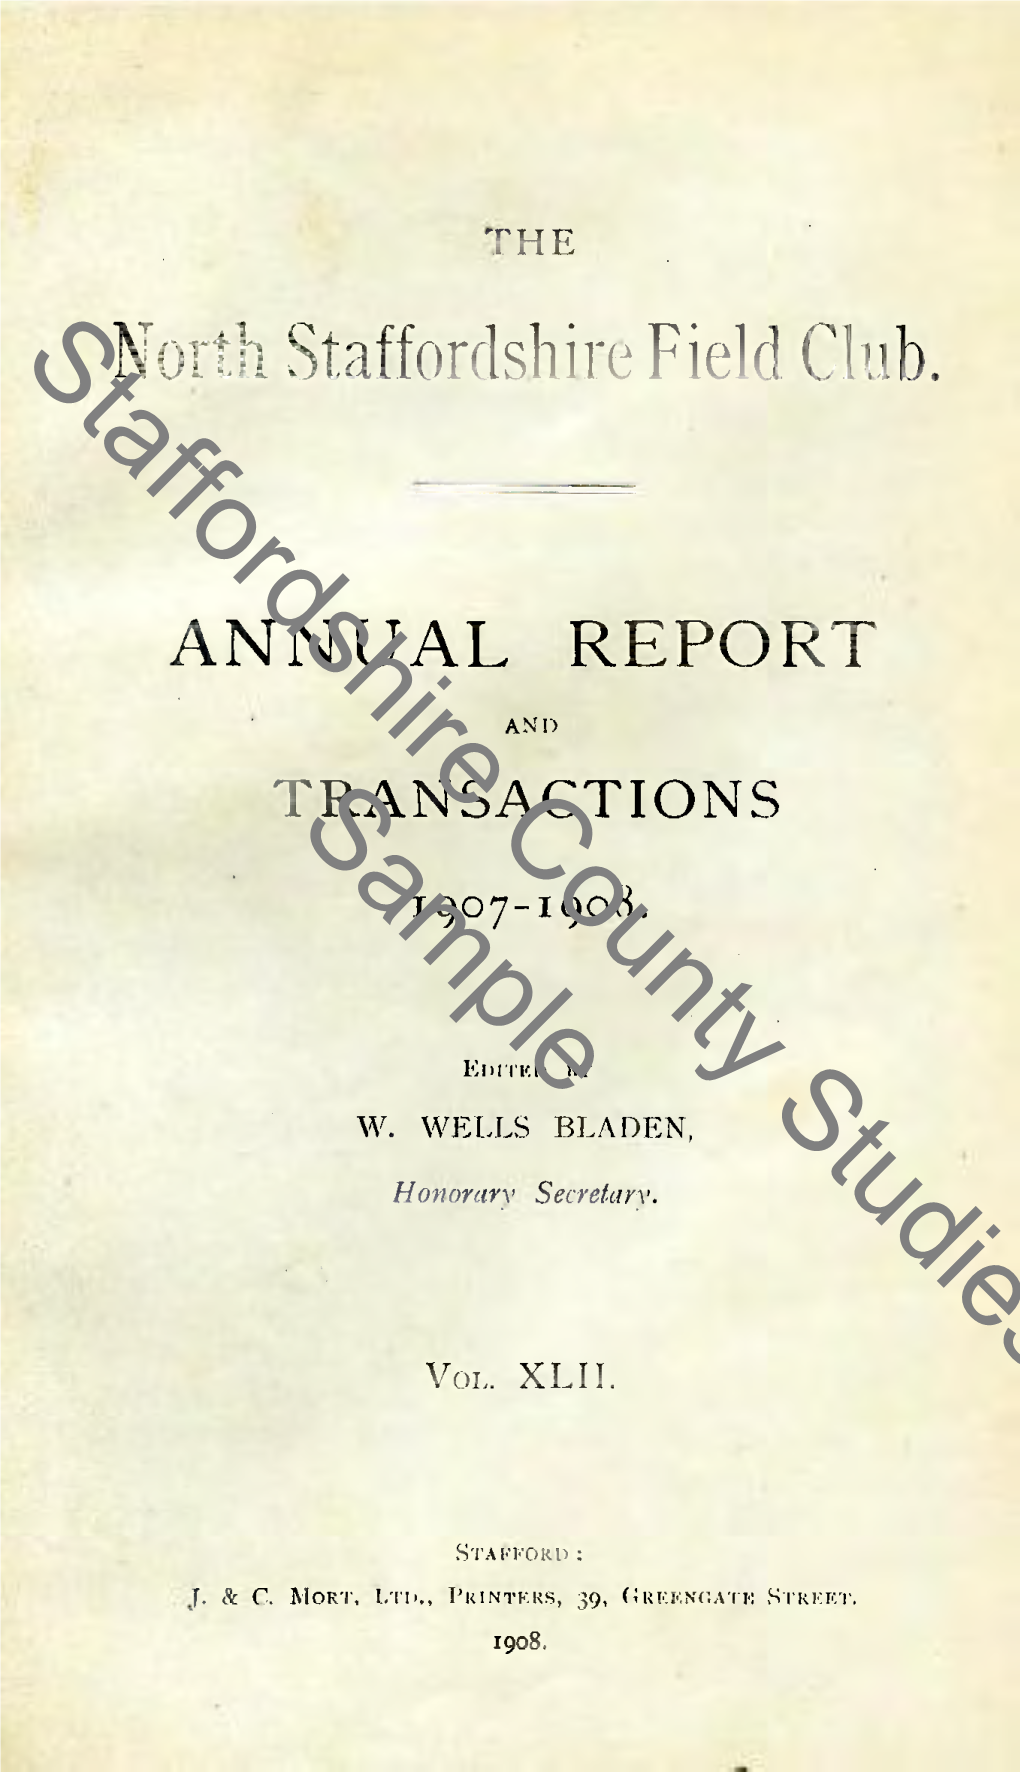 North Staffordshire Field Club, Annual Report and Transactions, 1908, Vol